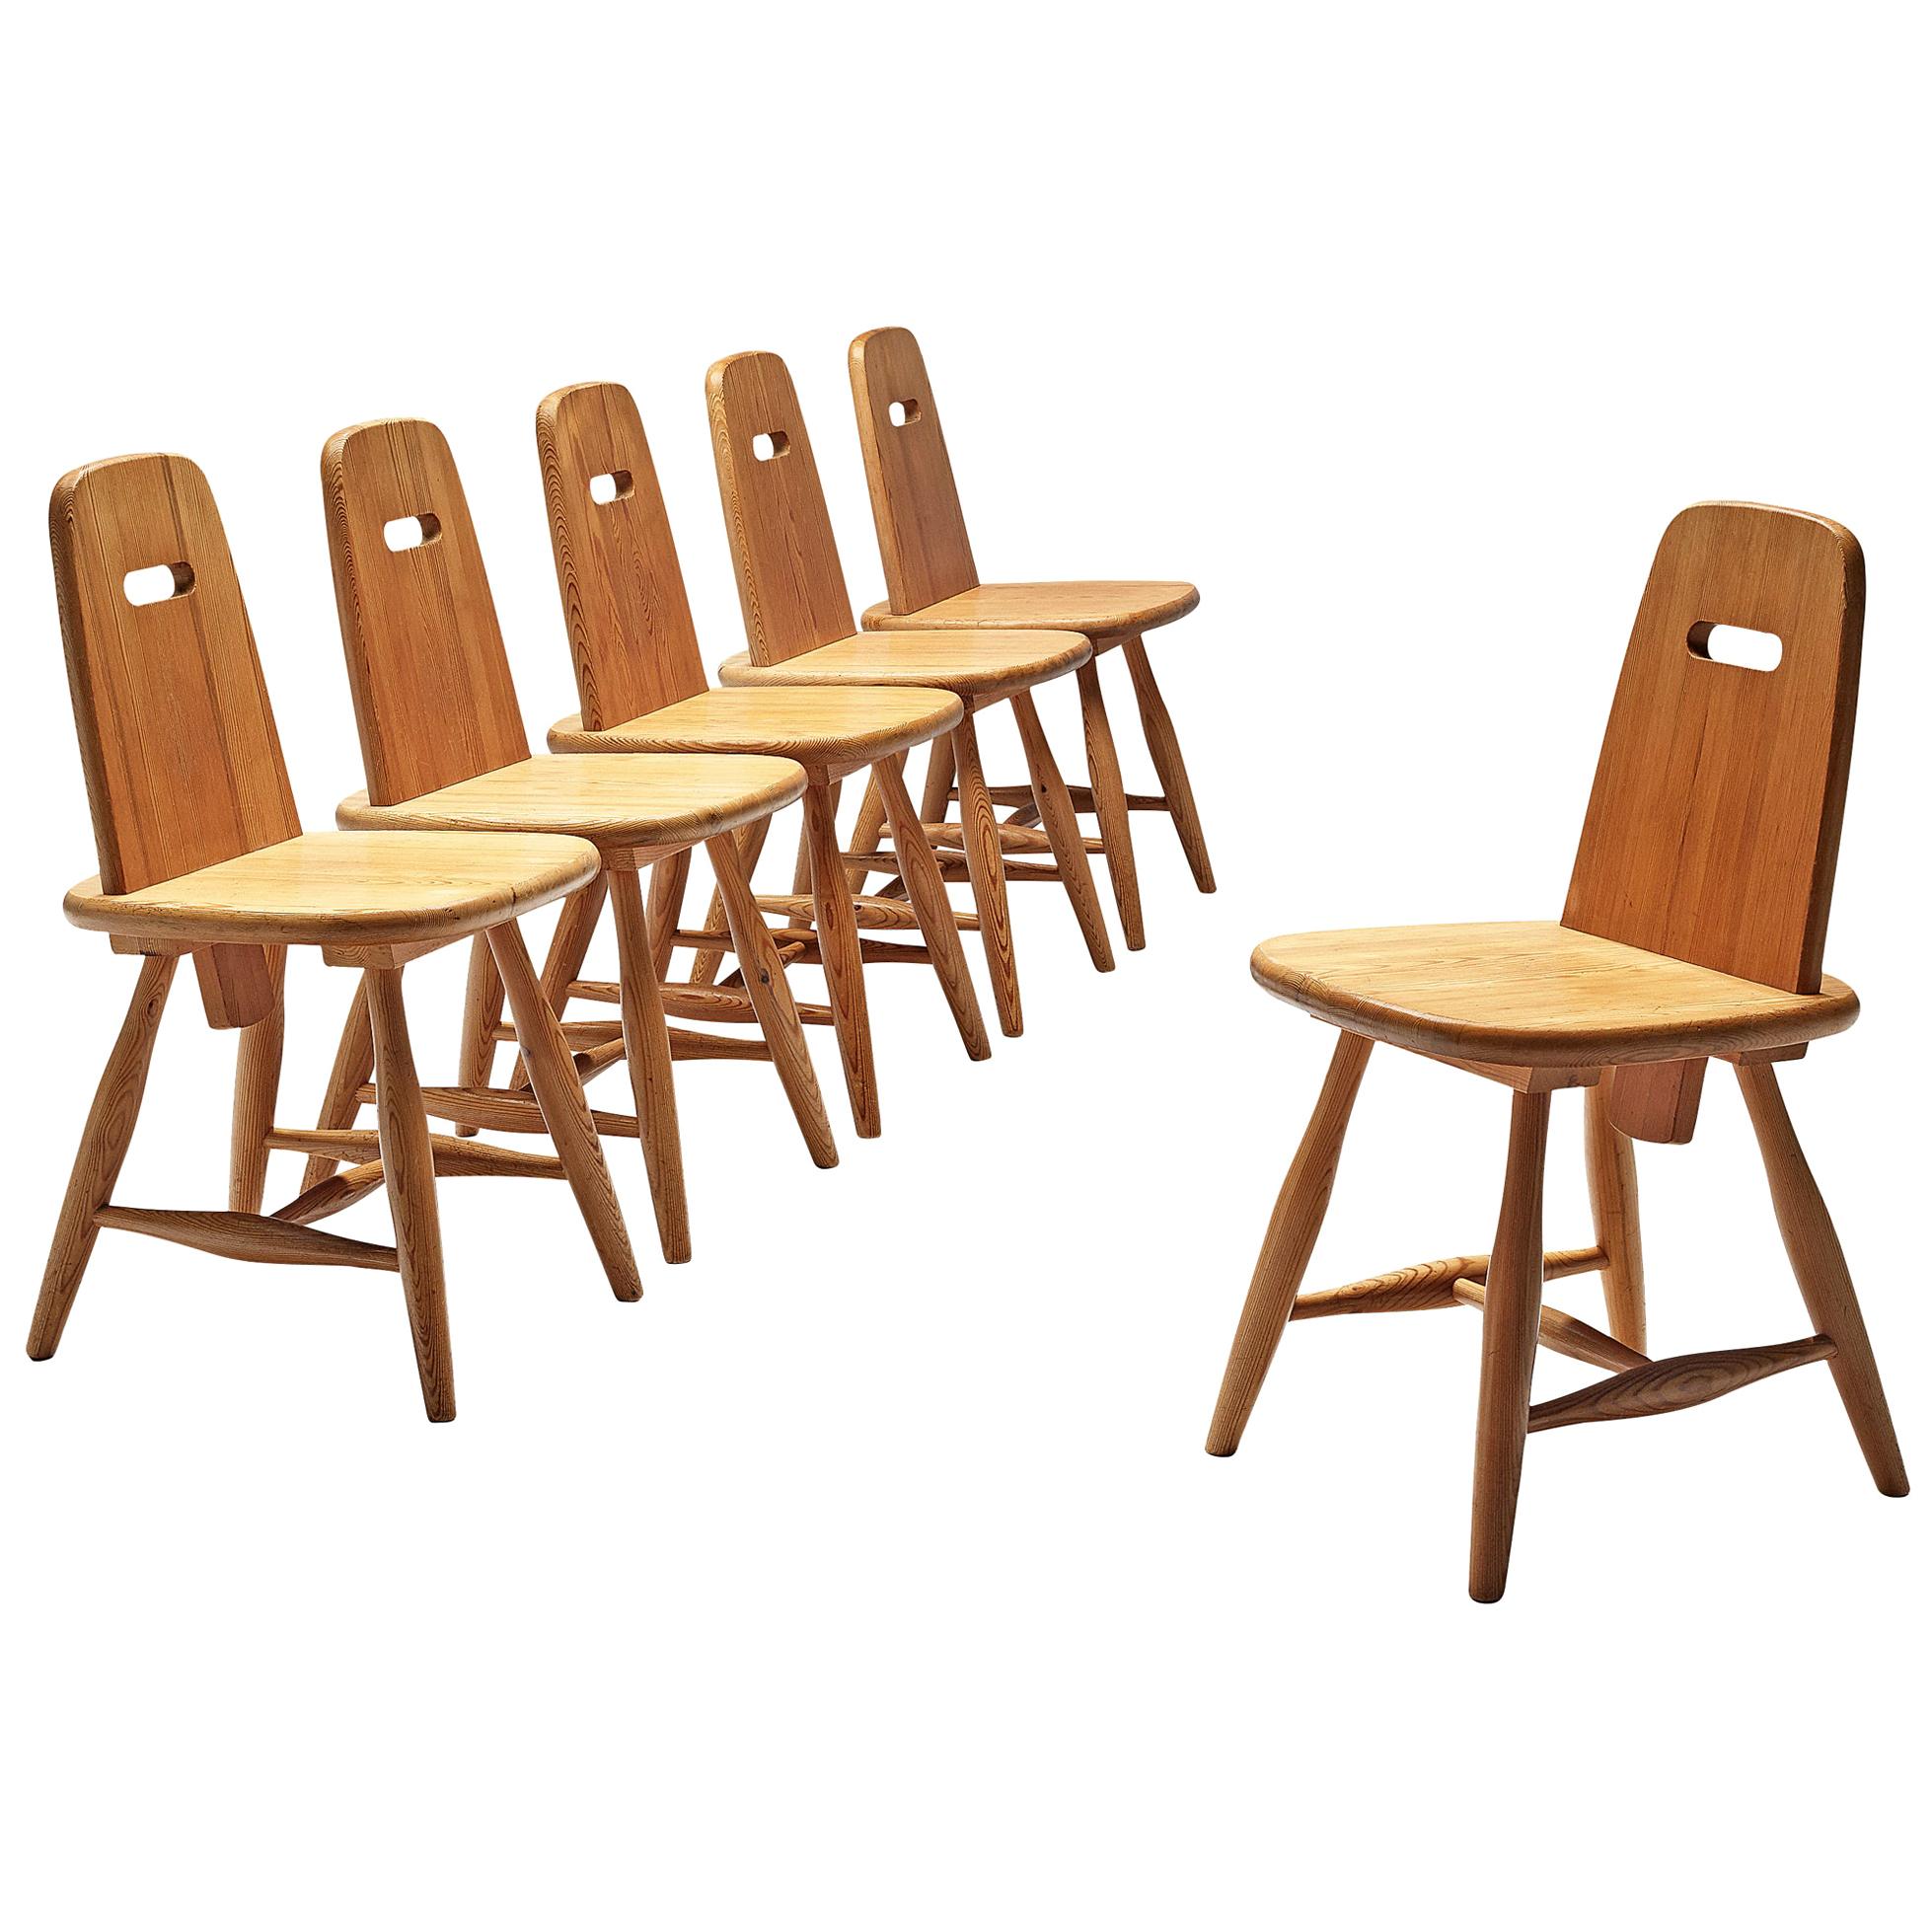 Finnish Set of Six Dining Chairs in Solid Pine by Eero Aarnio